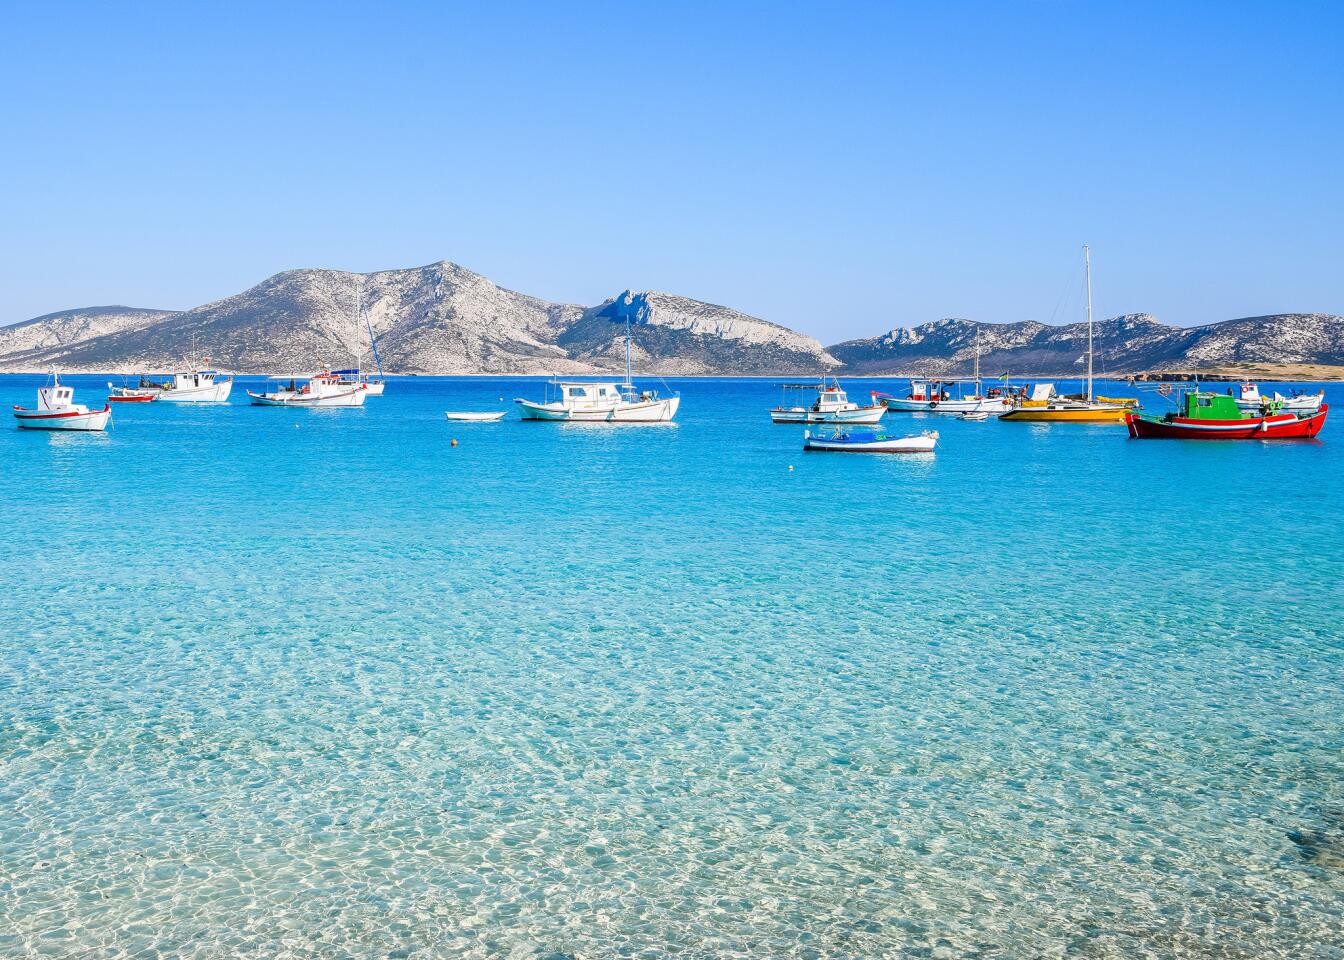 Traditional fishing boats in turquoise waters provide picturesque views at Koufonisia in Small Cyclades, Greece.